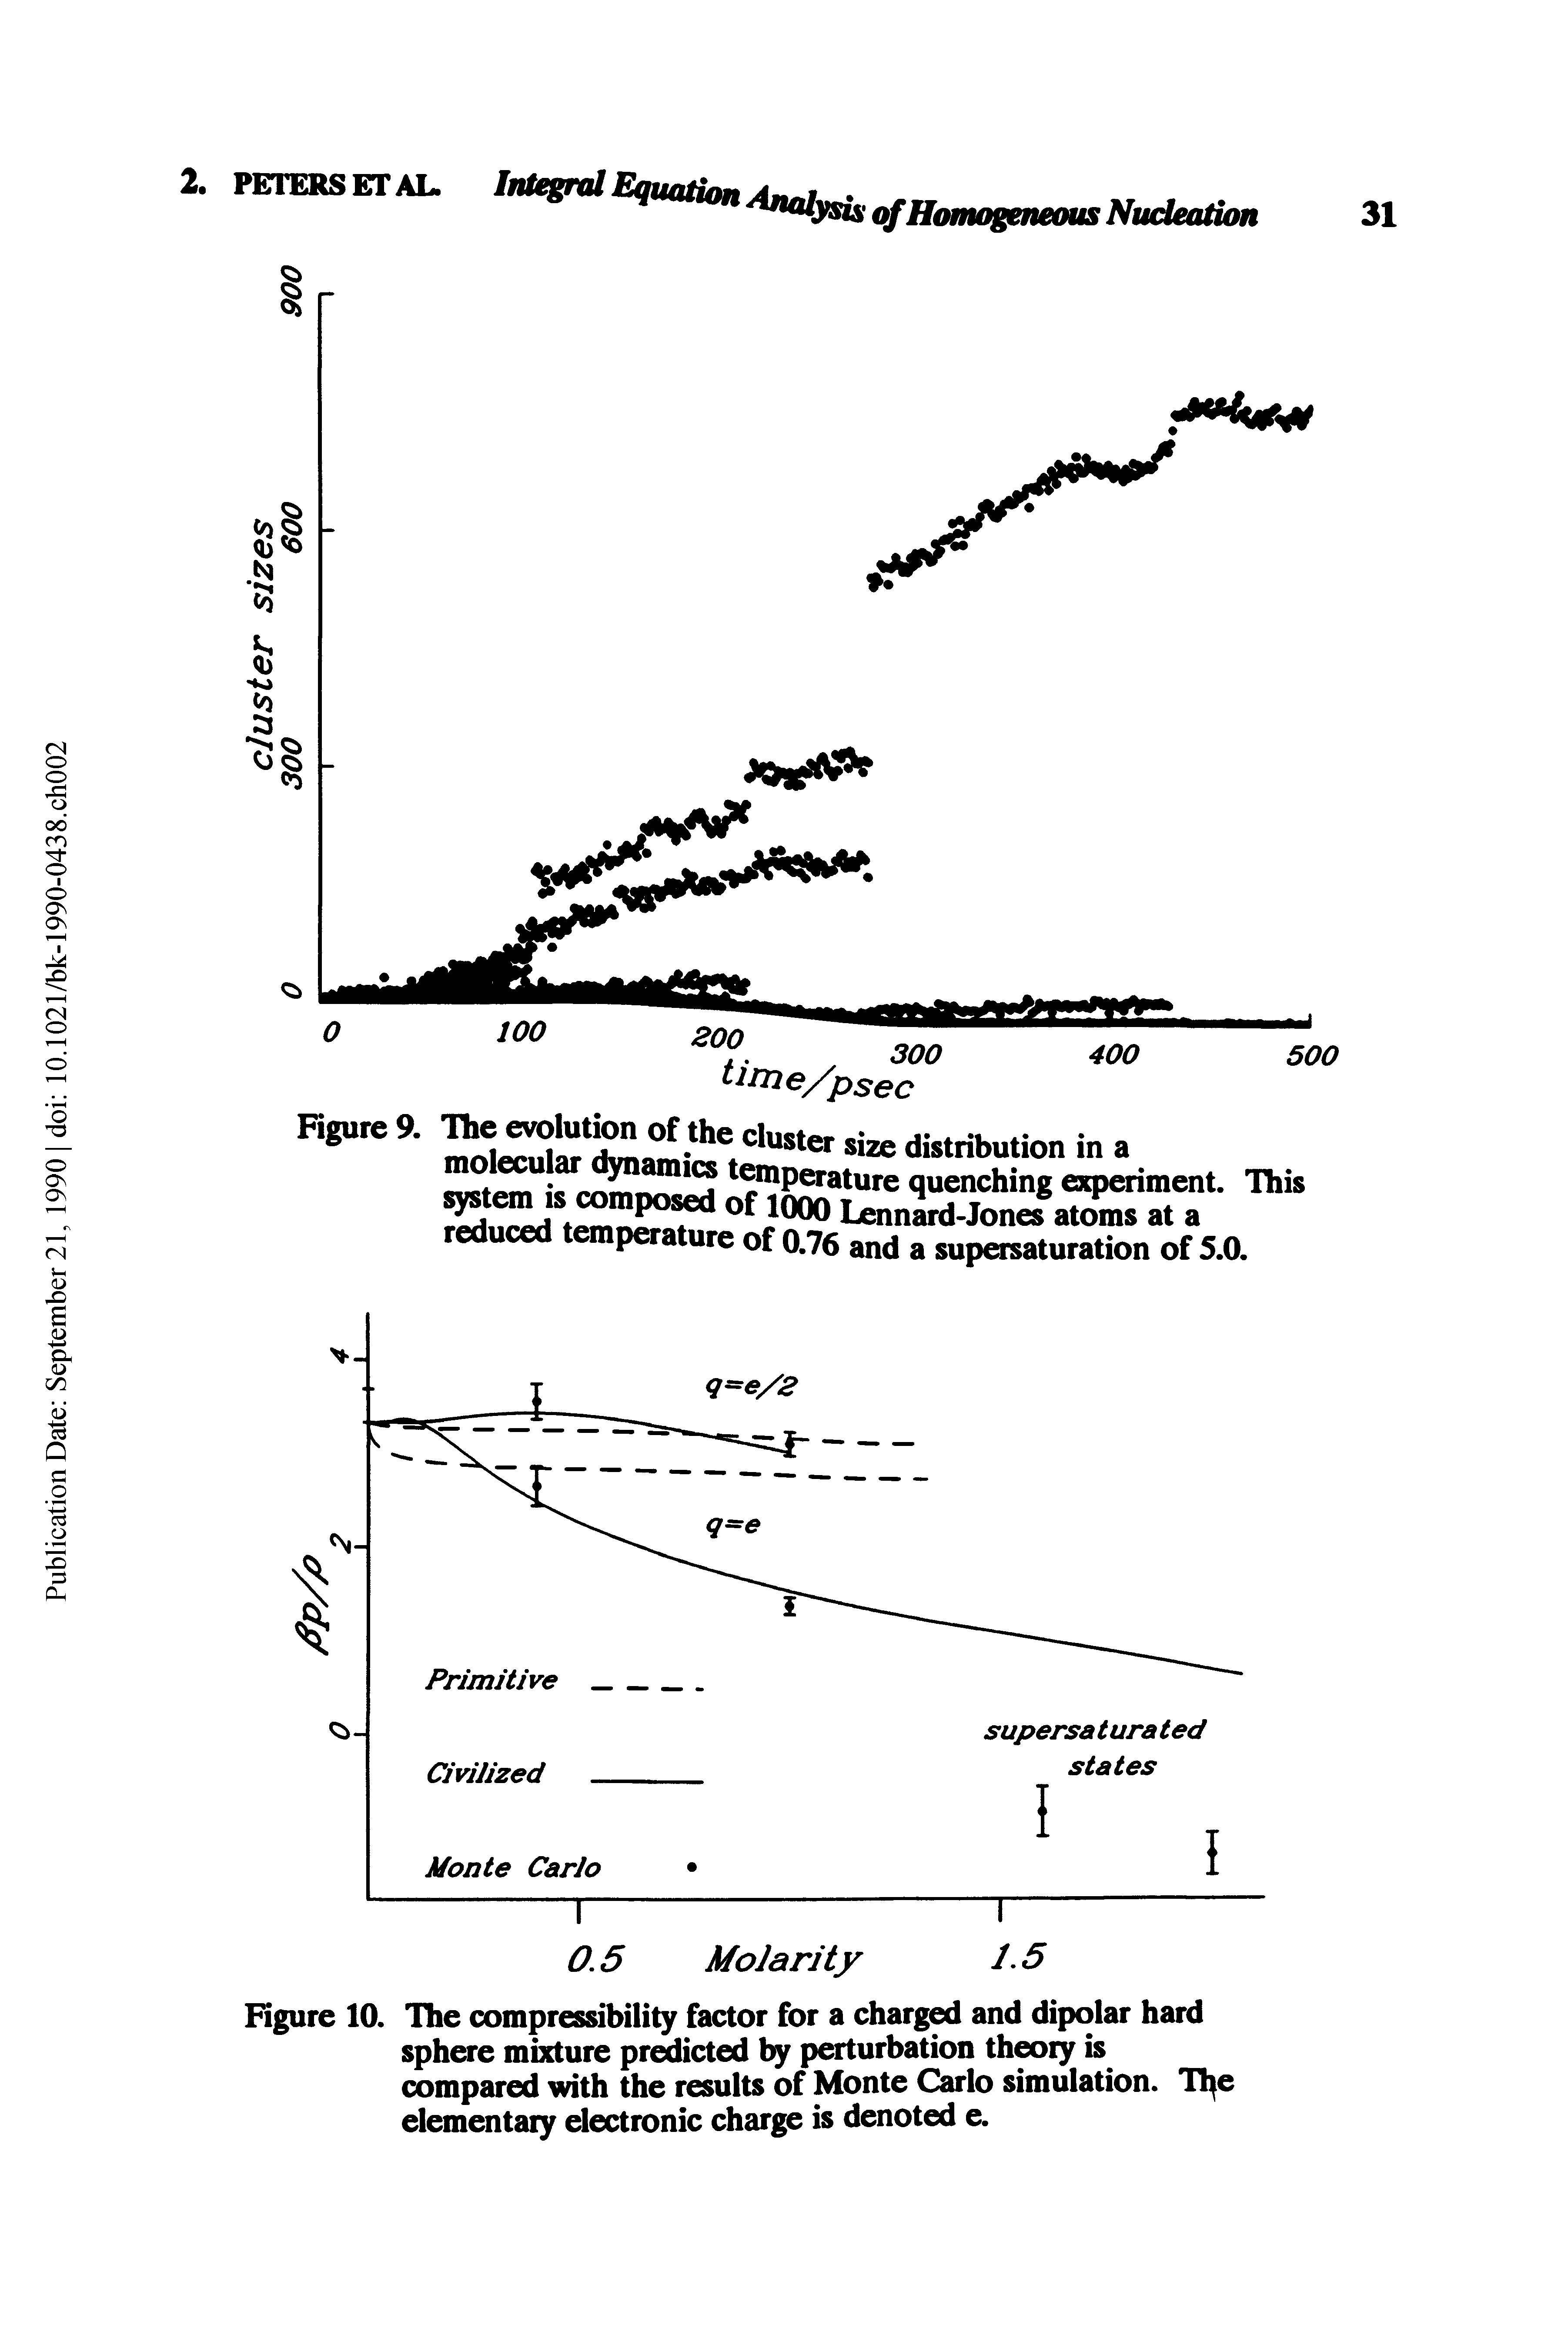 Figure 10. The compressibility factor for a charg and dipolar hard sphere mixture pr icted by perturbation thmiy is compared with the results of Monte Carlo simulation. Tl e elementaiy electronic charge is denoted e.